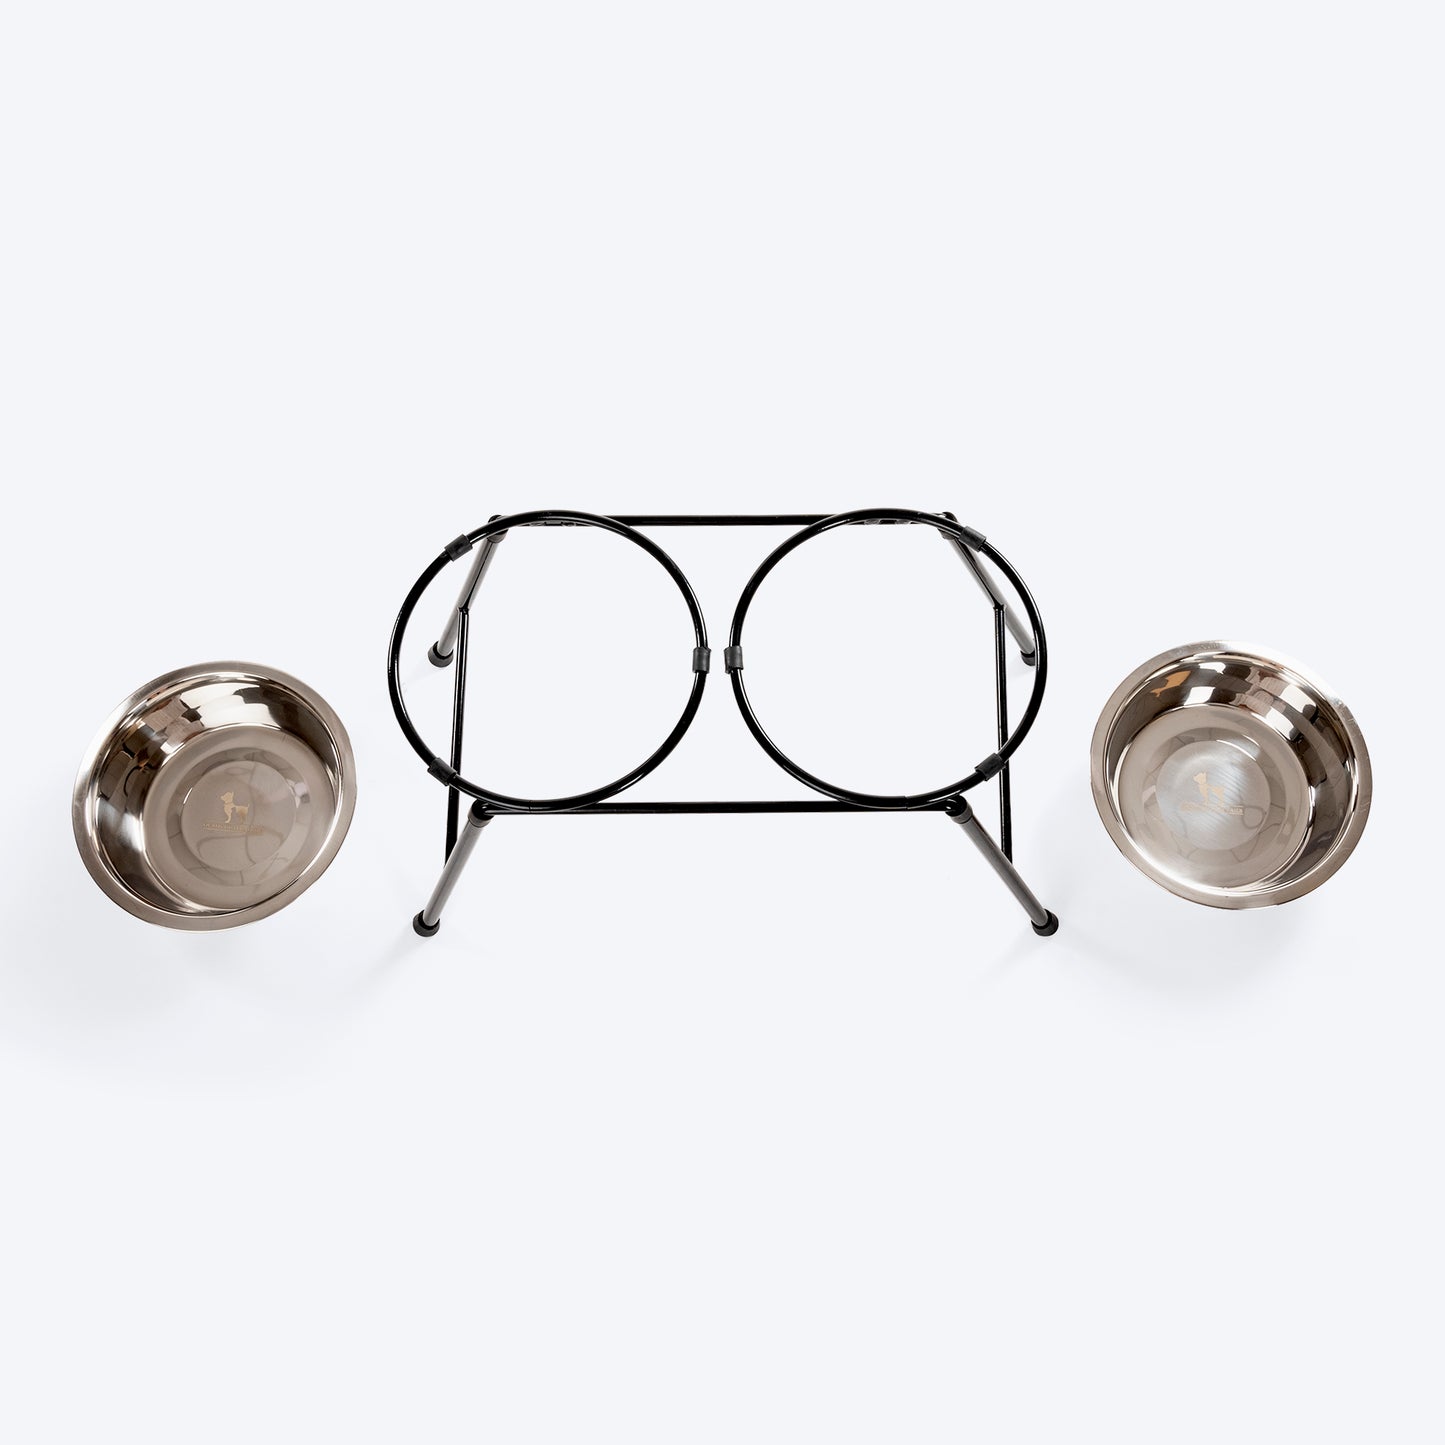 HUFT High Feeder Double Diner Stand With Steel Dog Bowl Inserts - Black - Heads Up For Tails